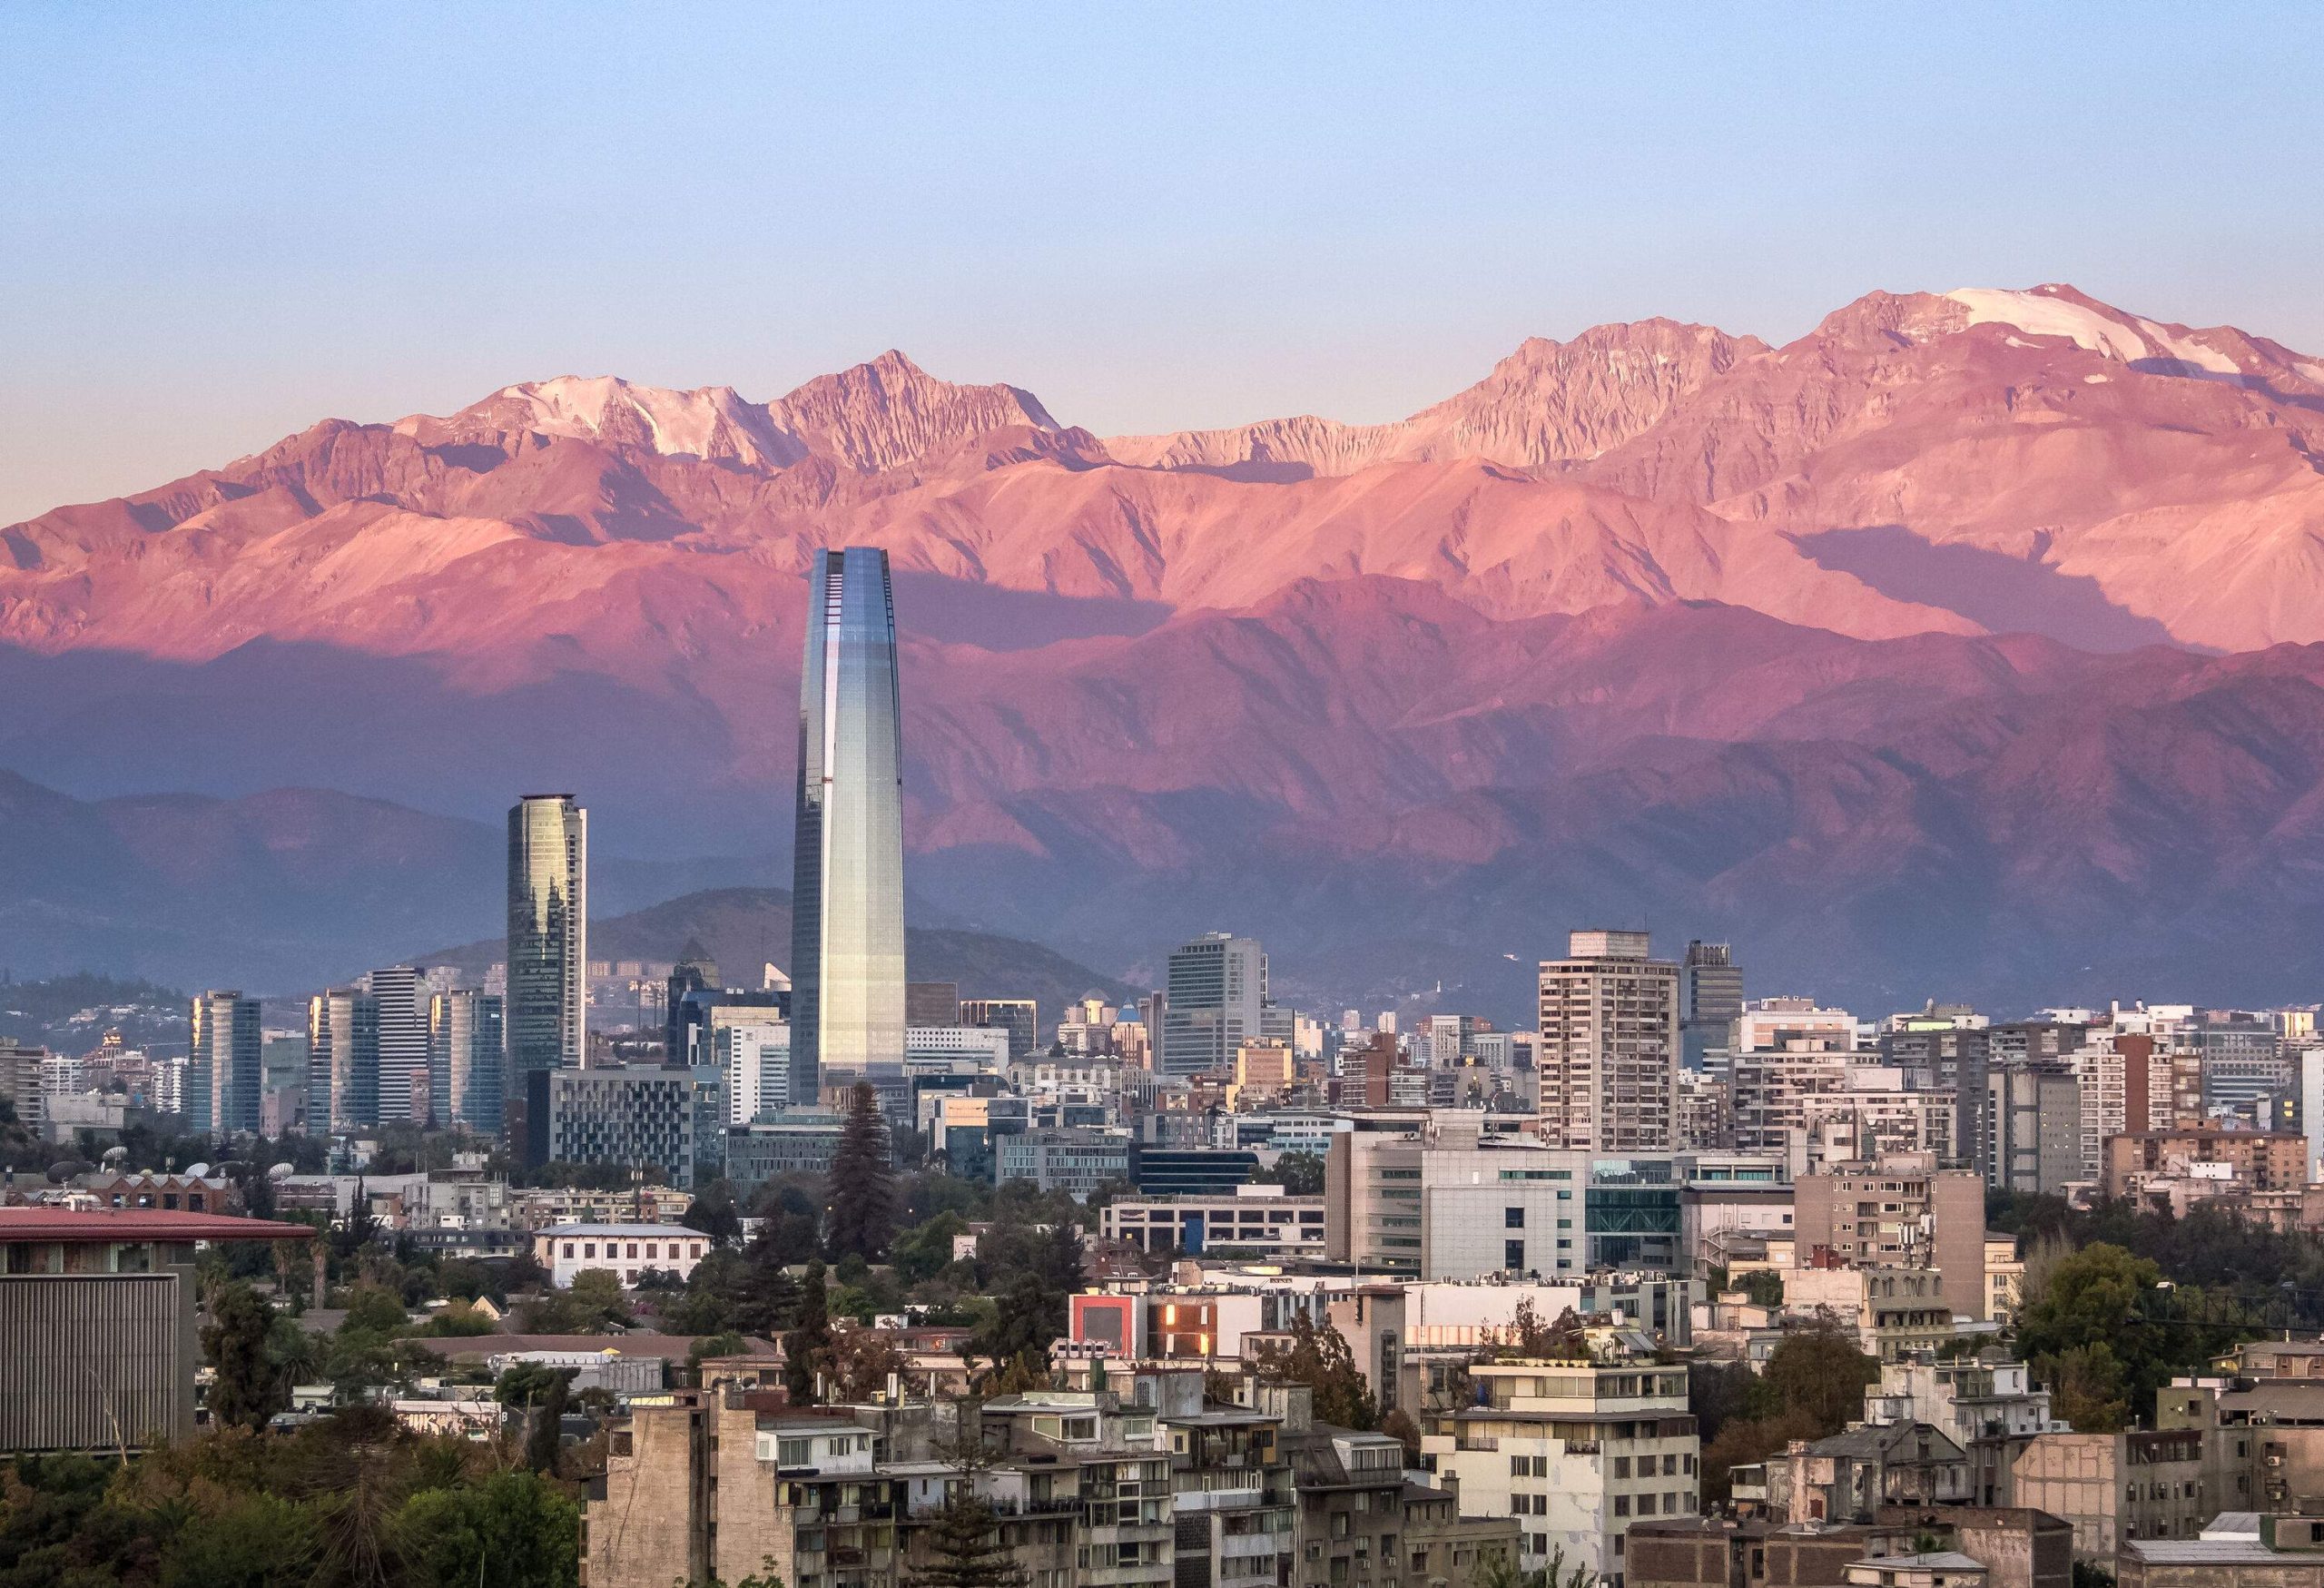 Gran Torre Santiago, a 62-storey skyscraper, dominates the cityscape at the base of tall bald sunlit mountains.